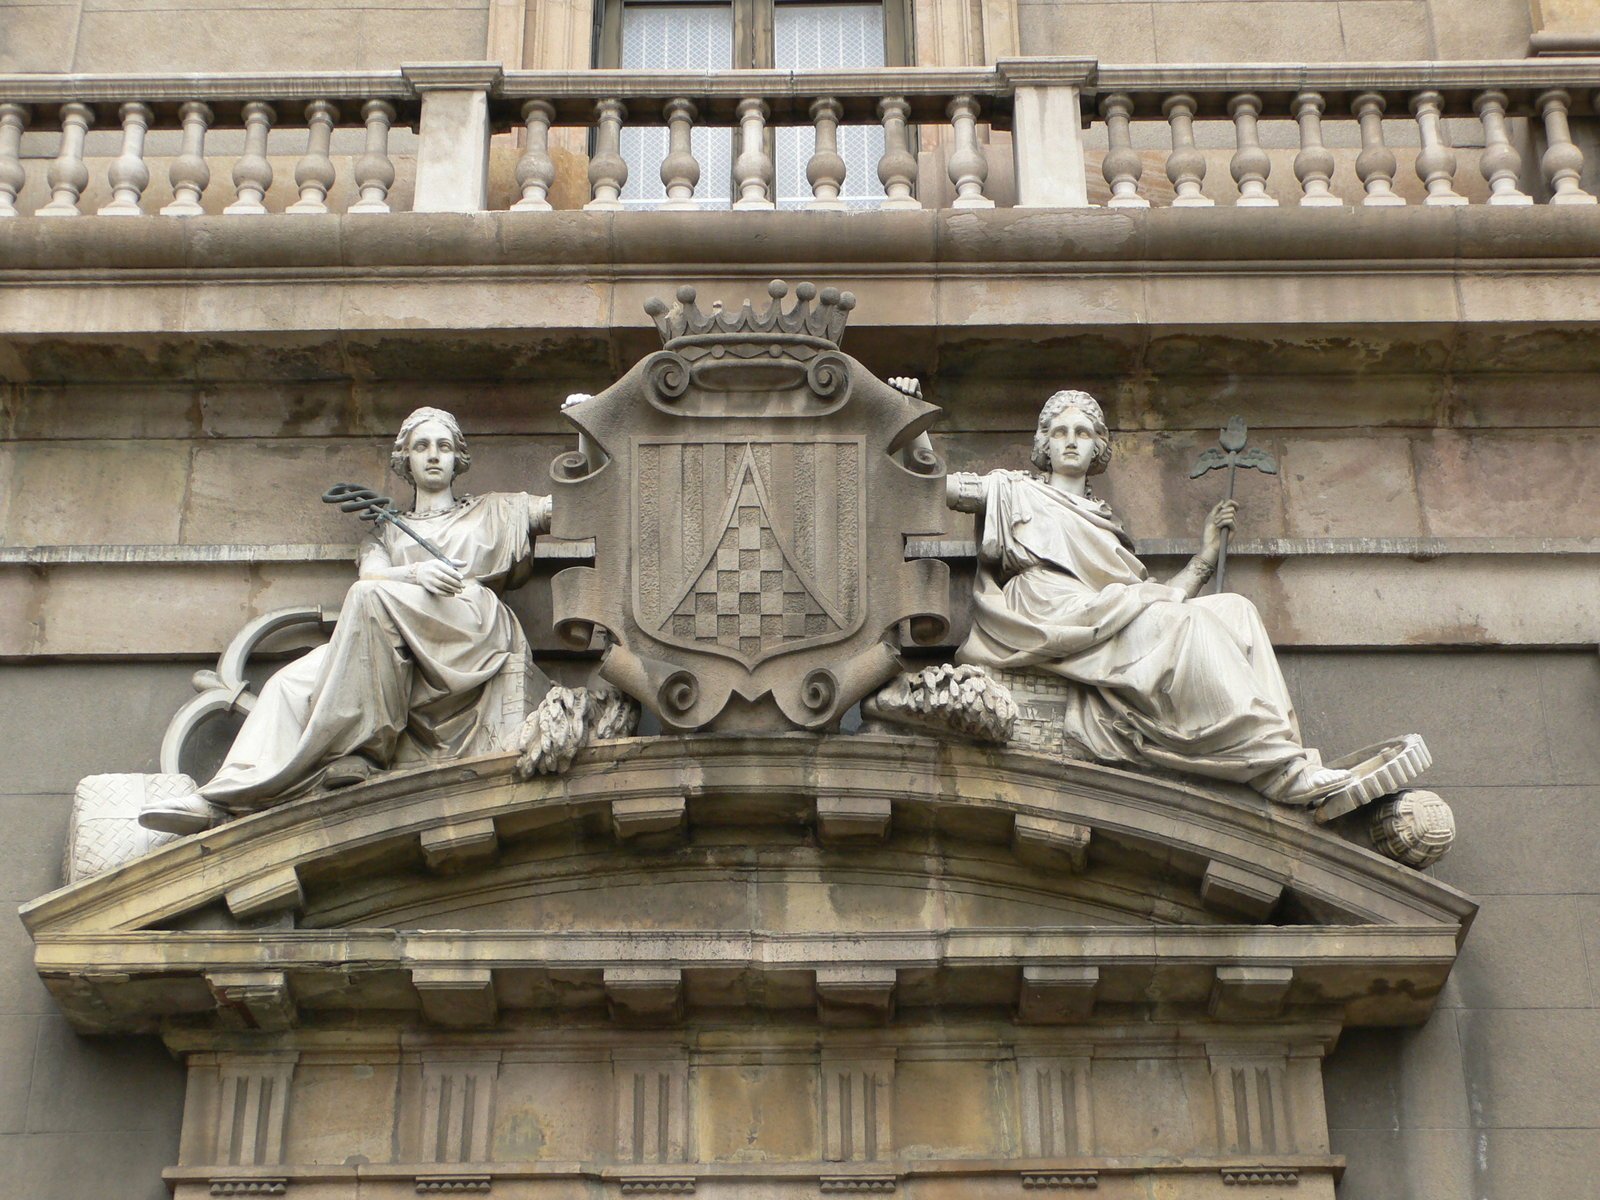 two statues sit on a ledge on the side of a building